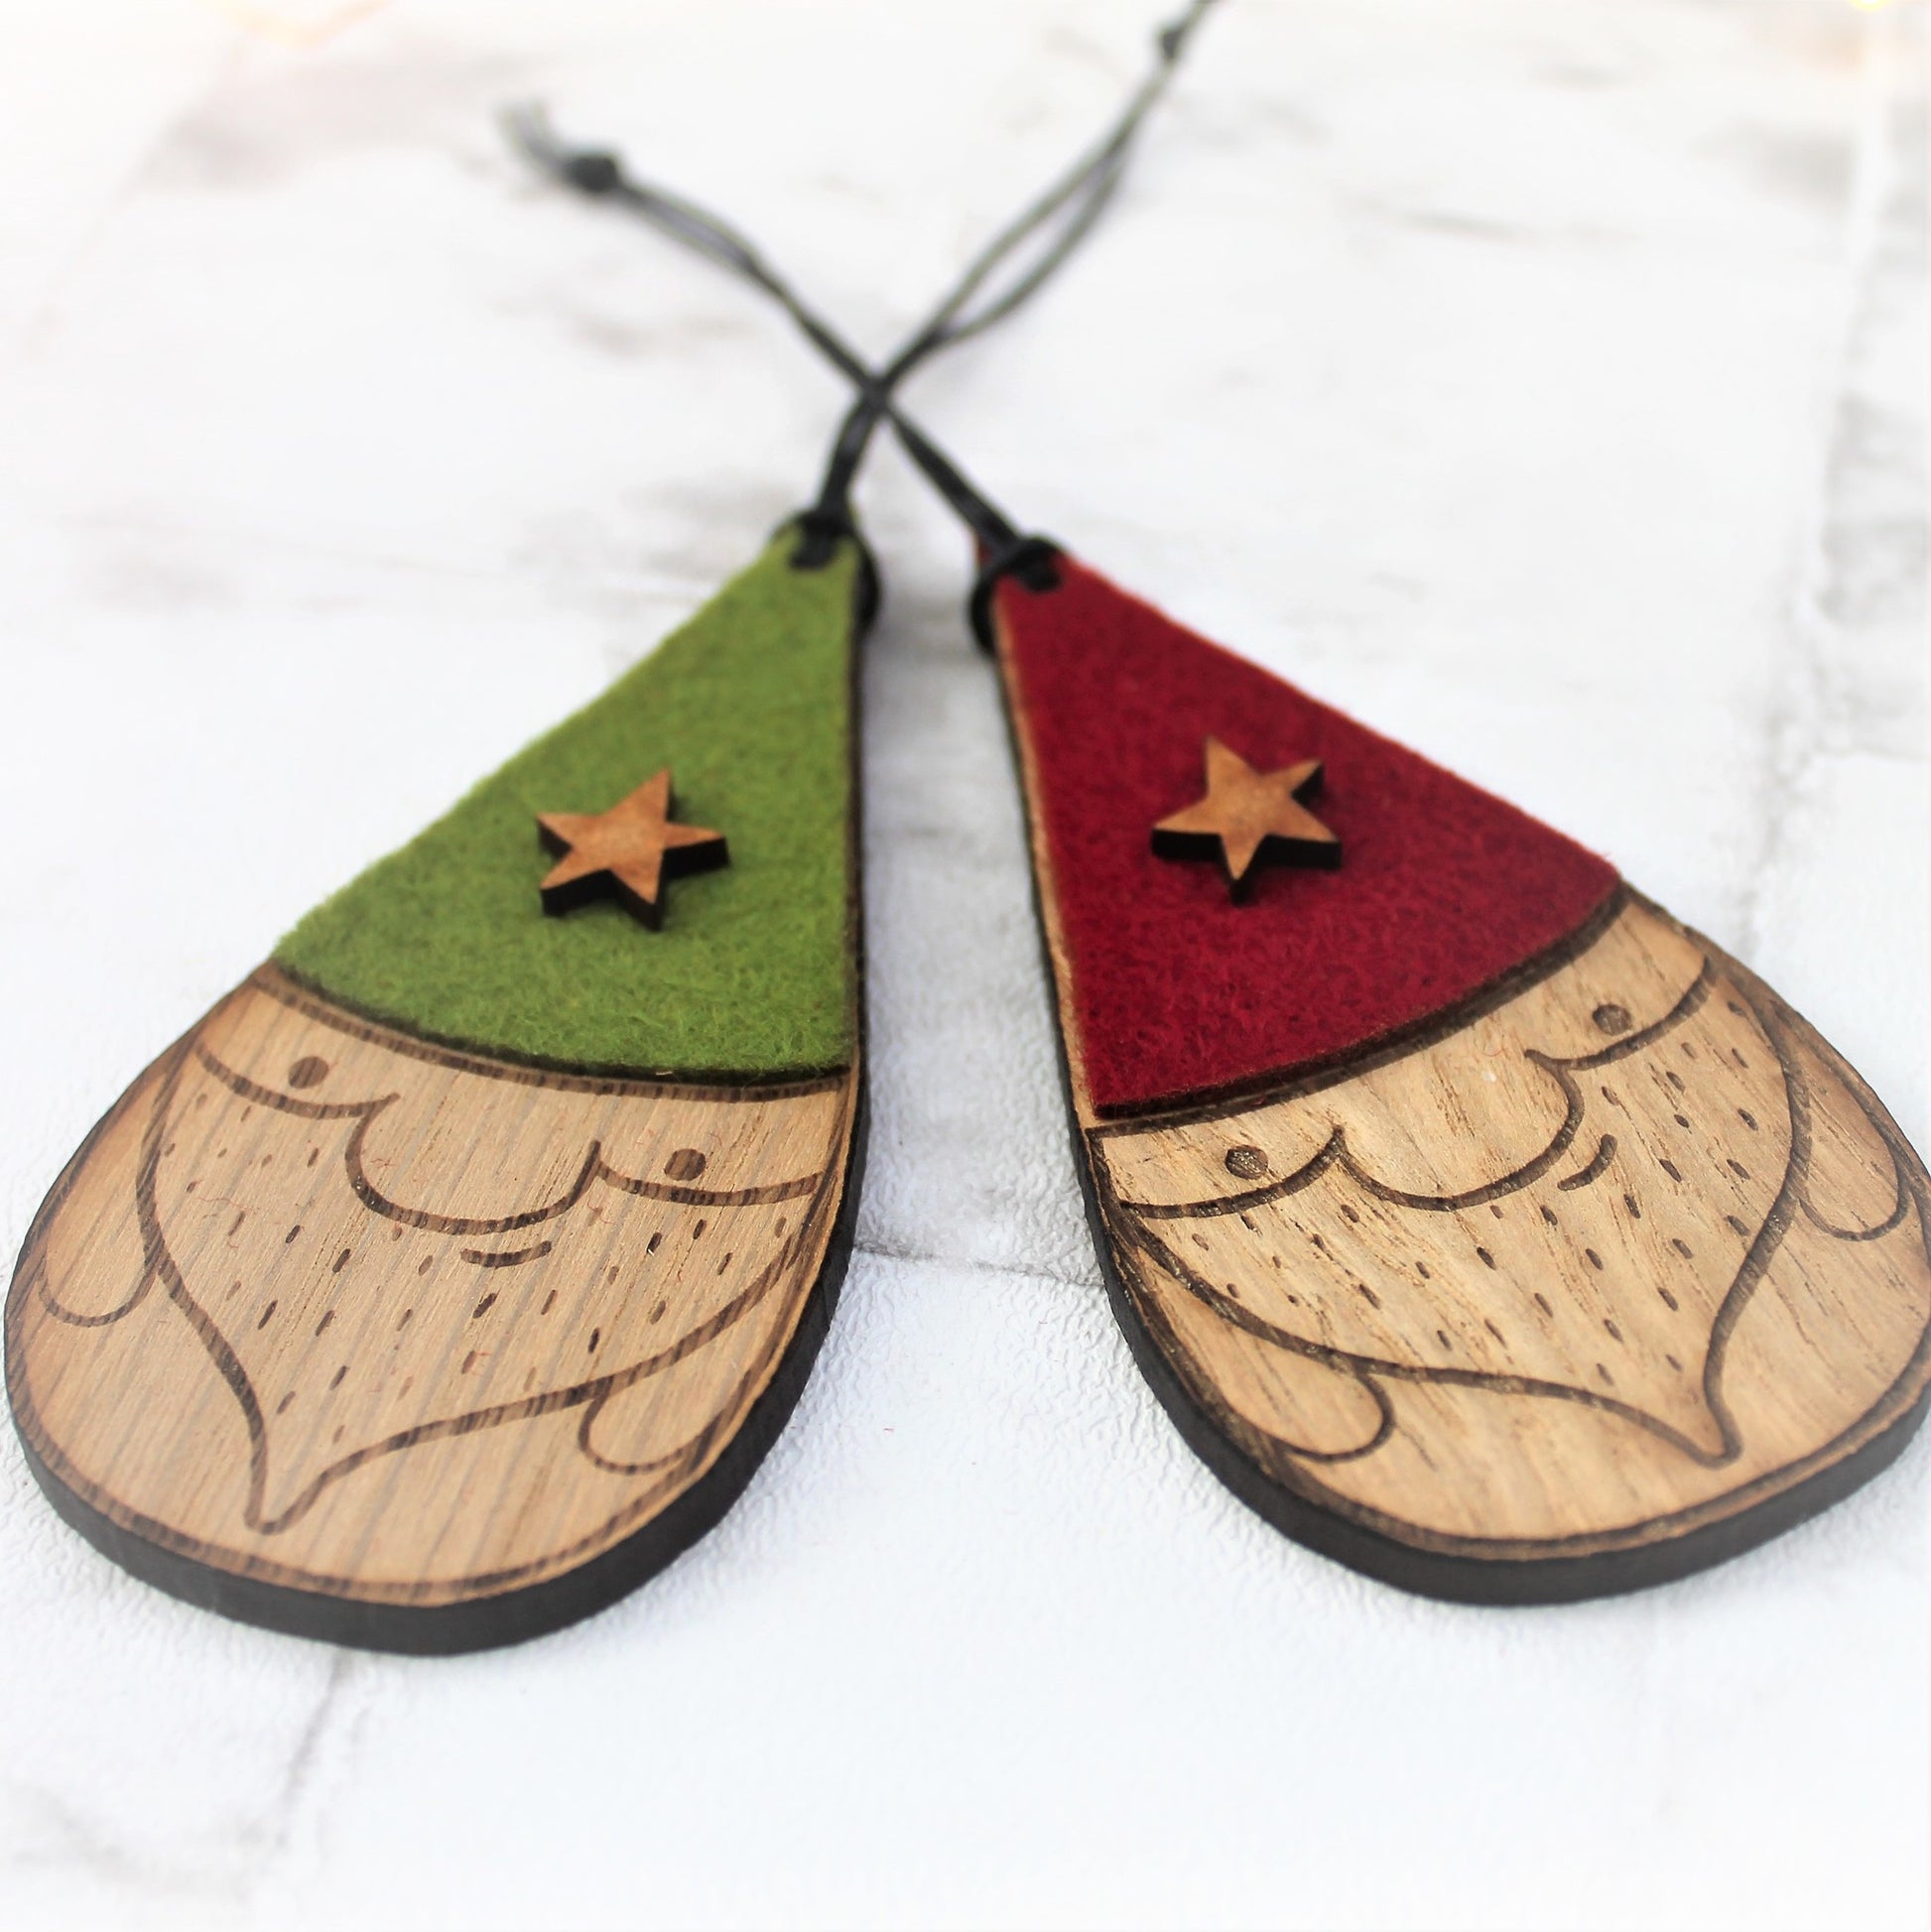 Set of 2 nisse / gnome baubles. With green and red hats with a star decoration. Made from wood and felt